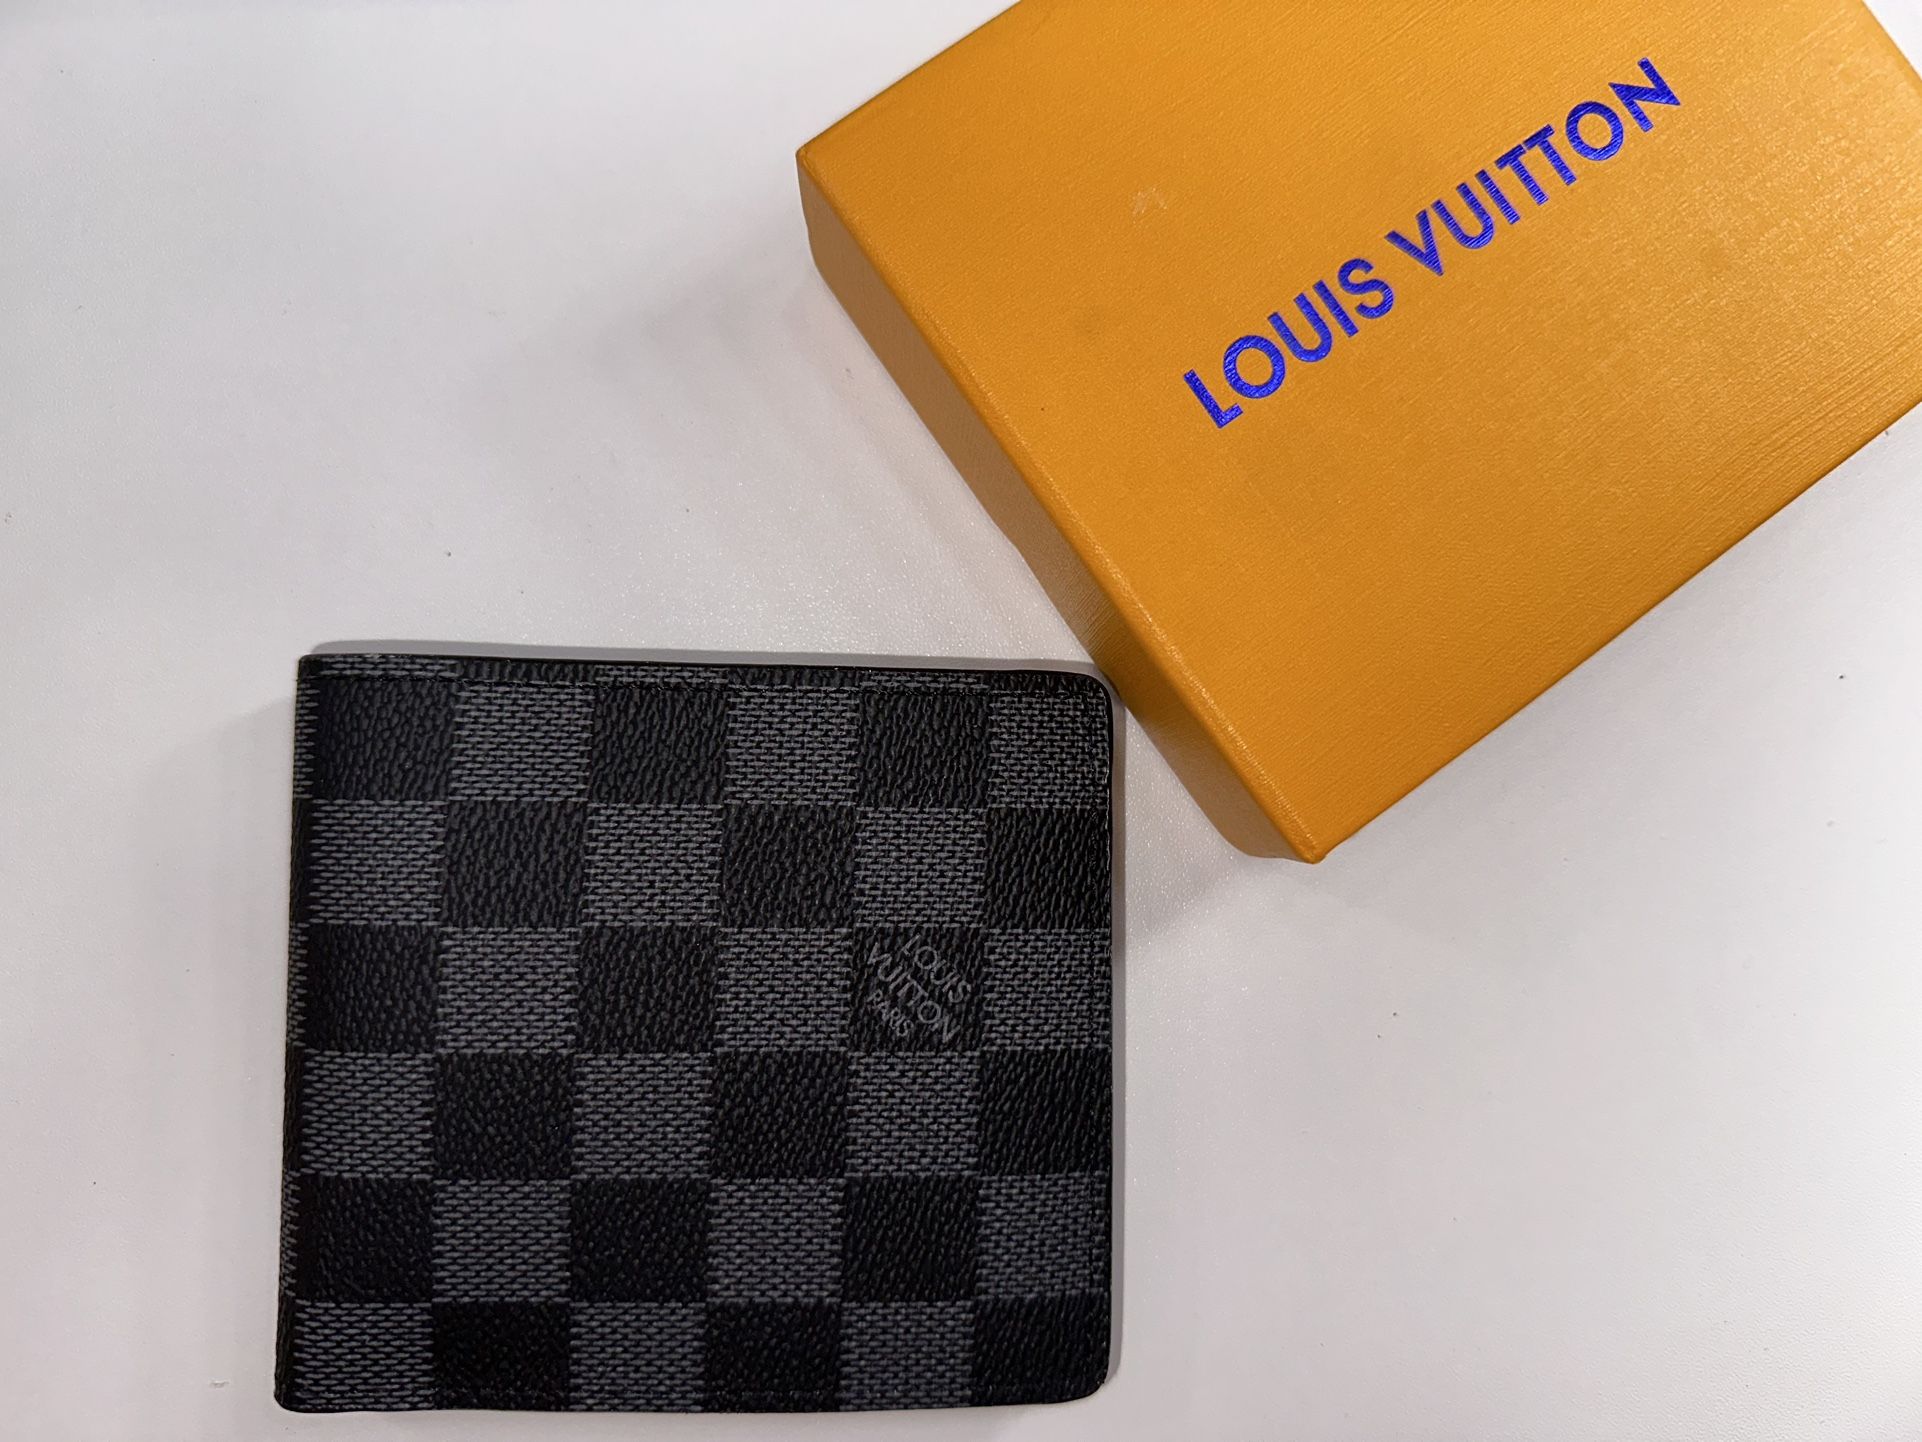 Lv Style Wallet For Men for Sale in Stafford, TX - OfferUp